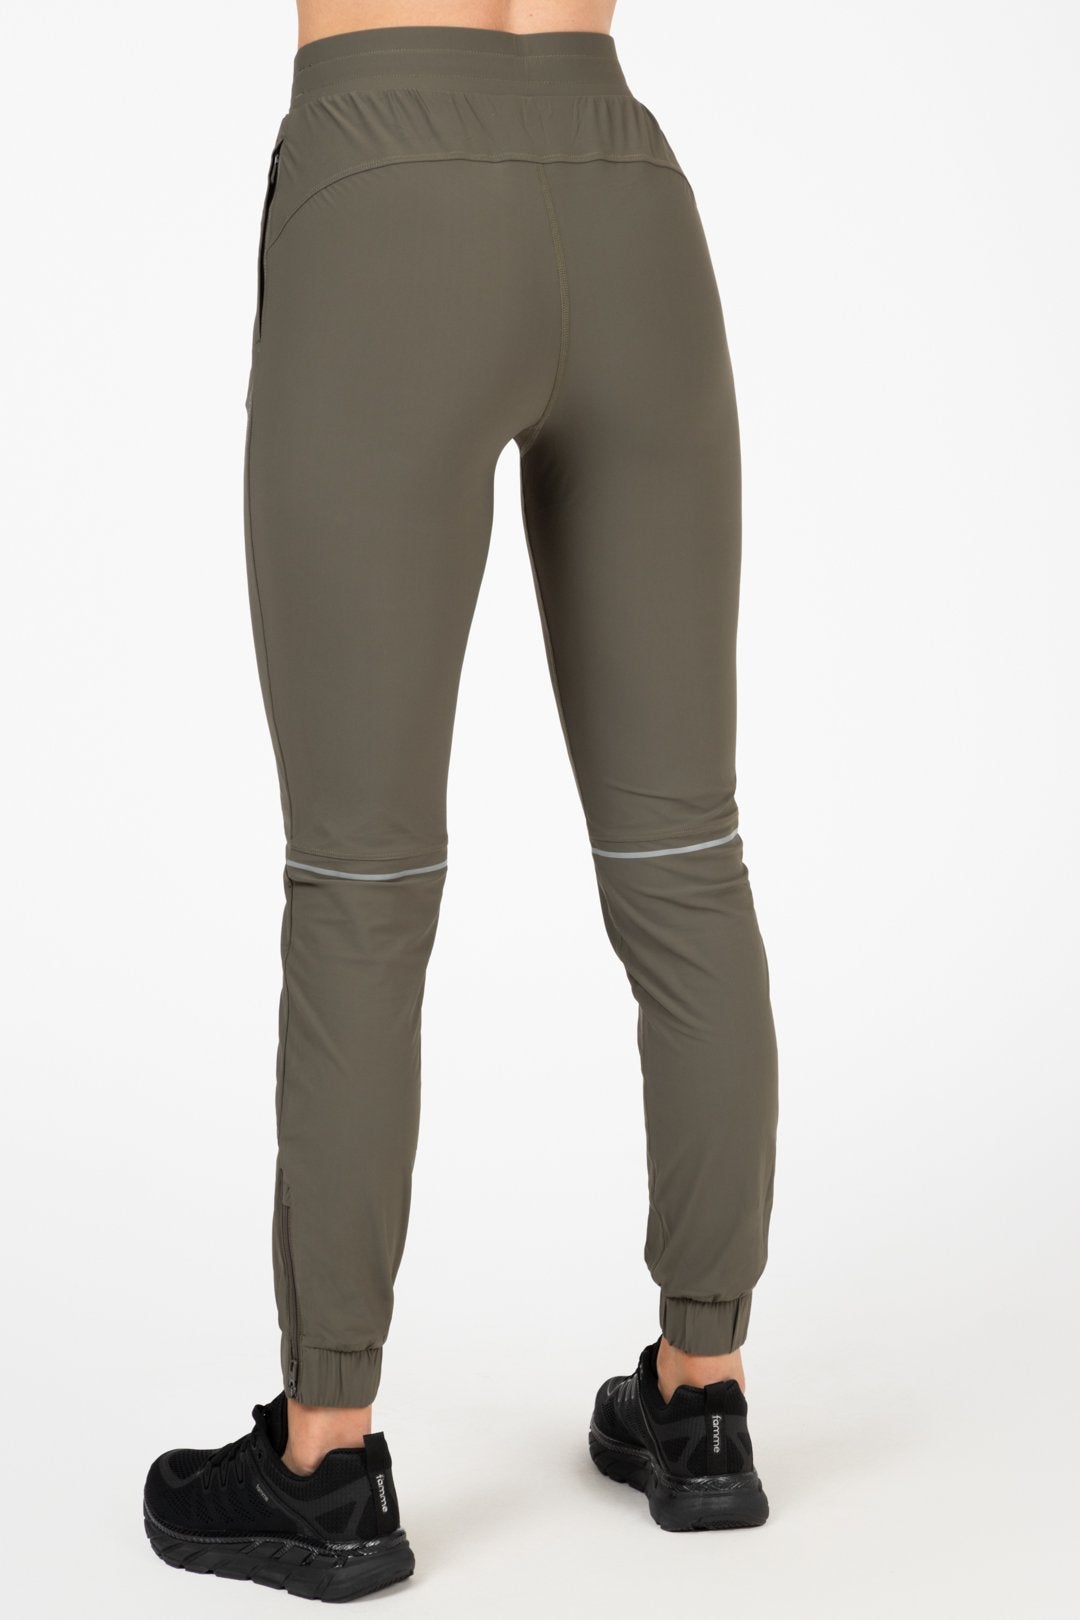 Training pants for women | With Pocket | Technical Fabric